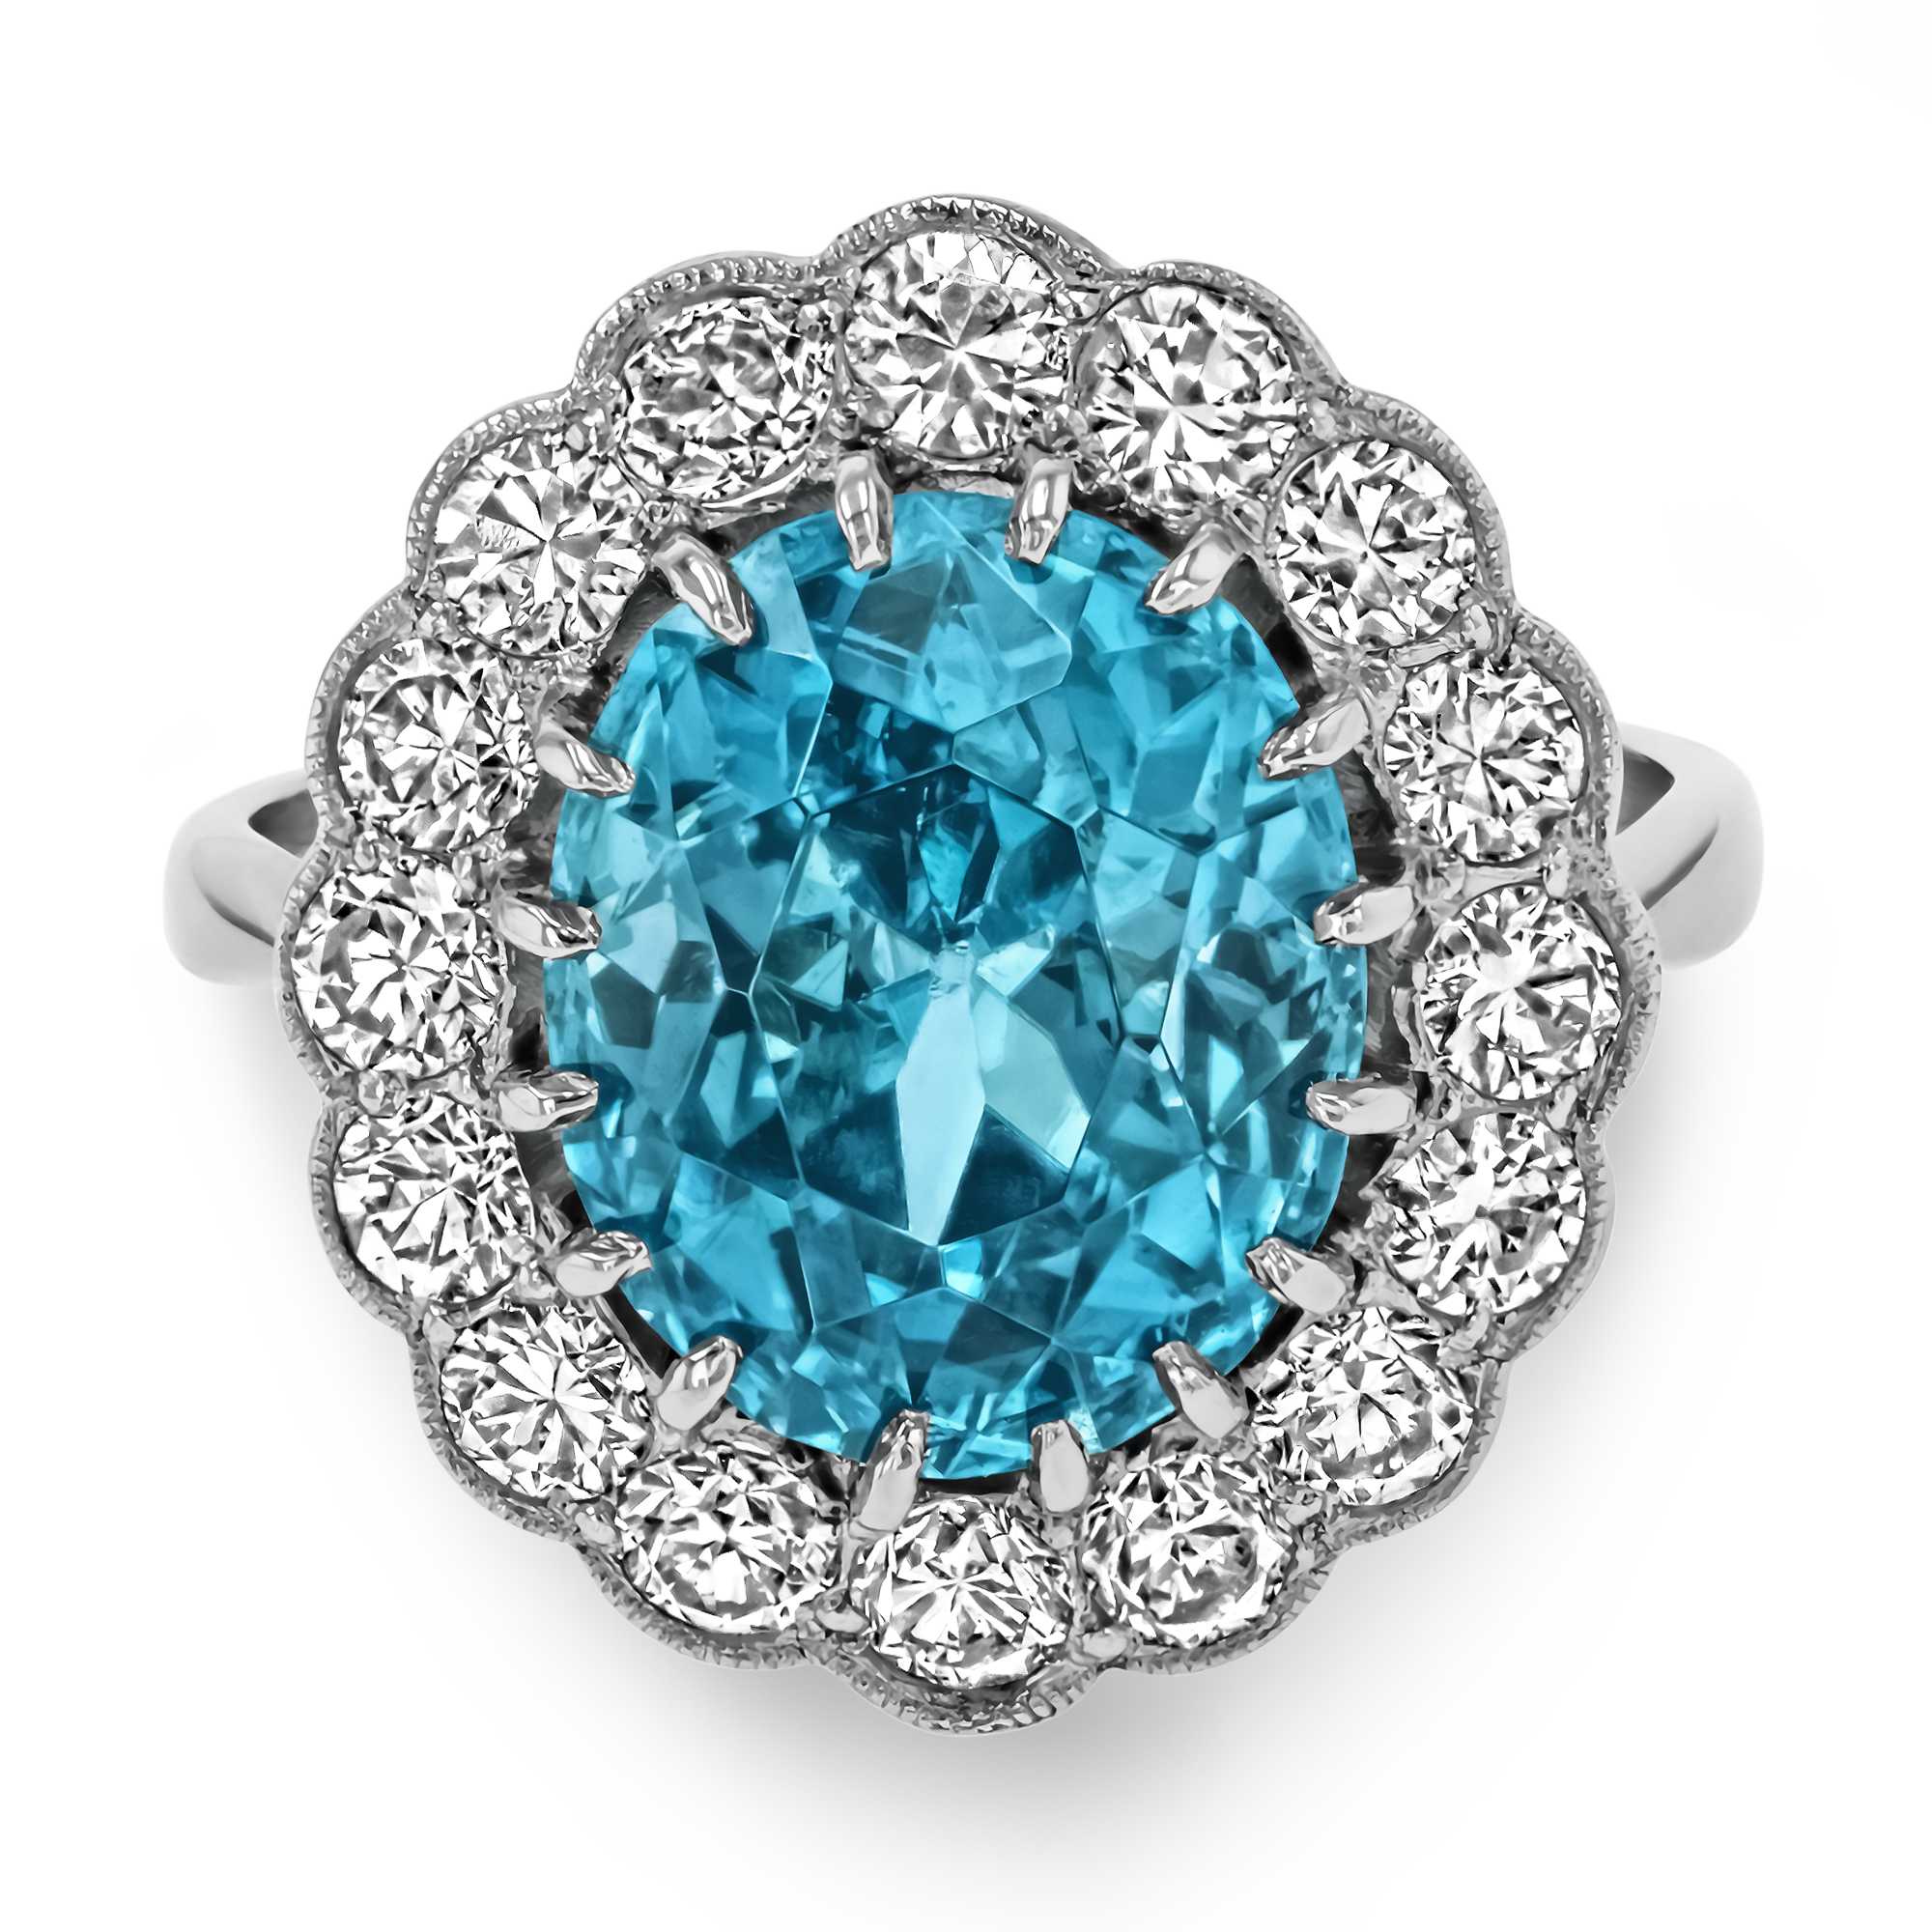 Oval Cut 7.81ct Blue Zircon and Diamond Cluster Ring Oval Cut, Claw Set_2